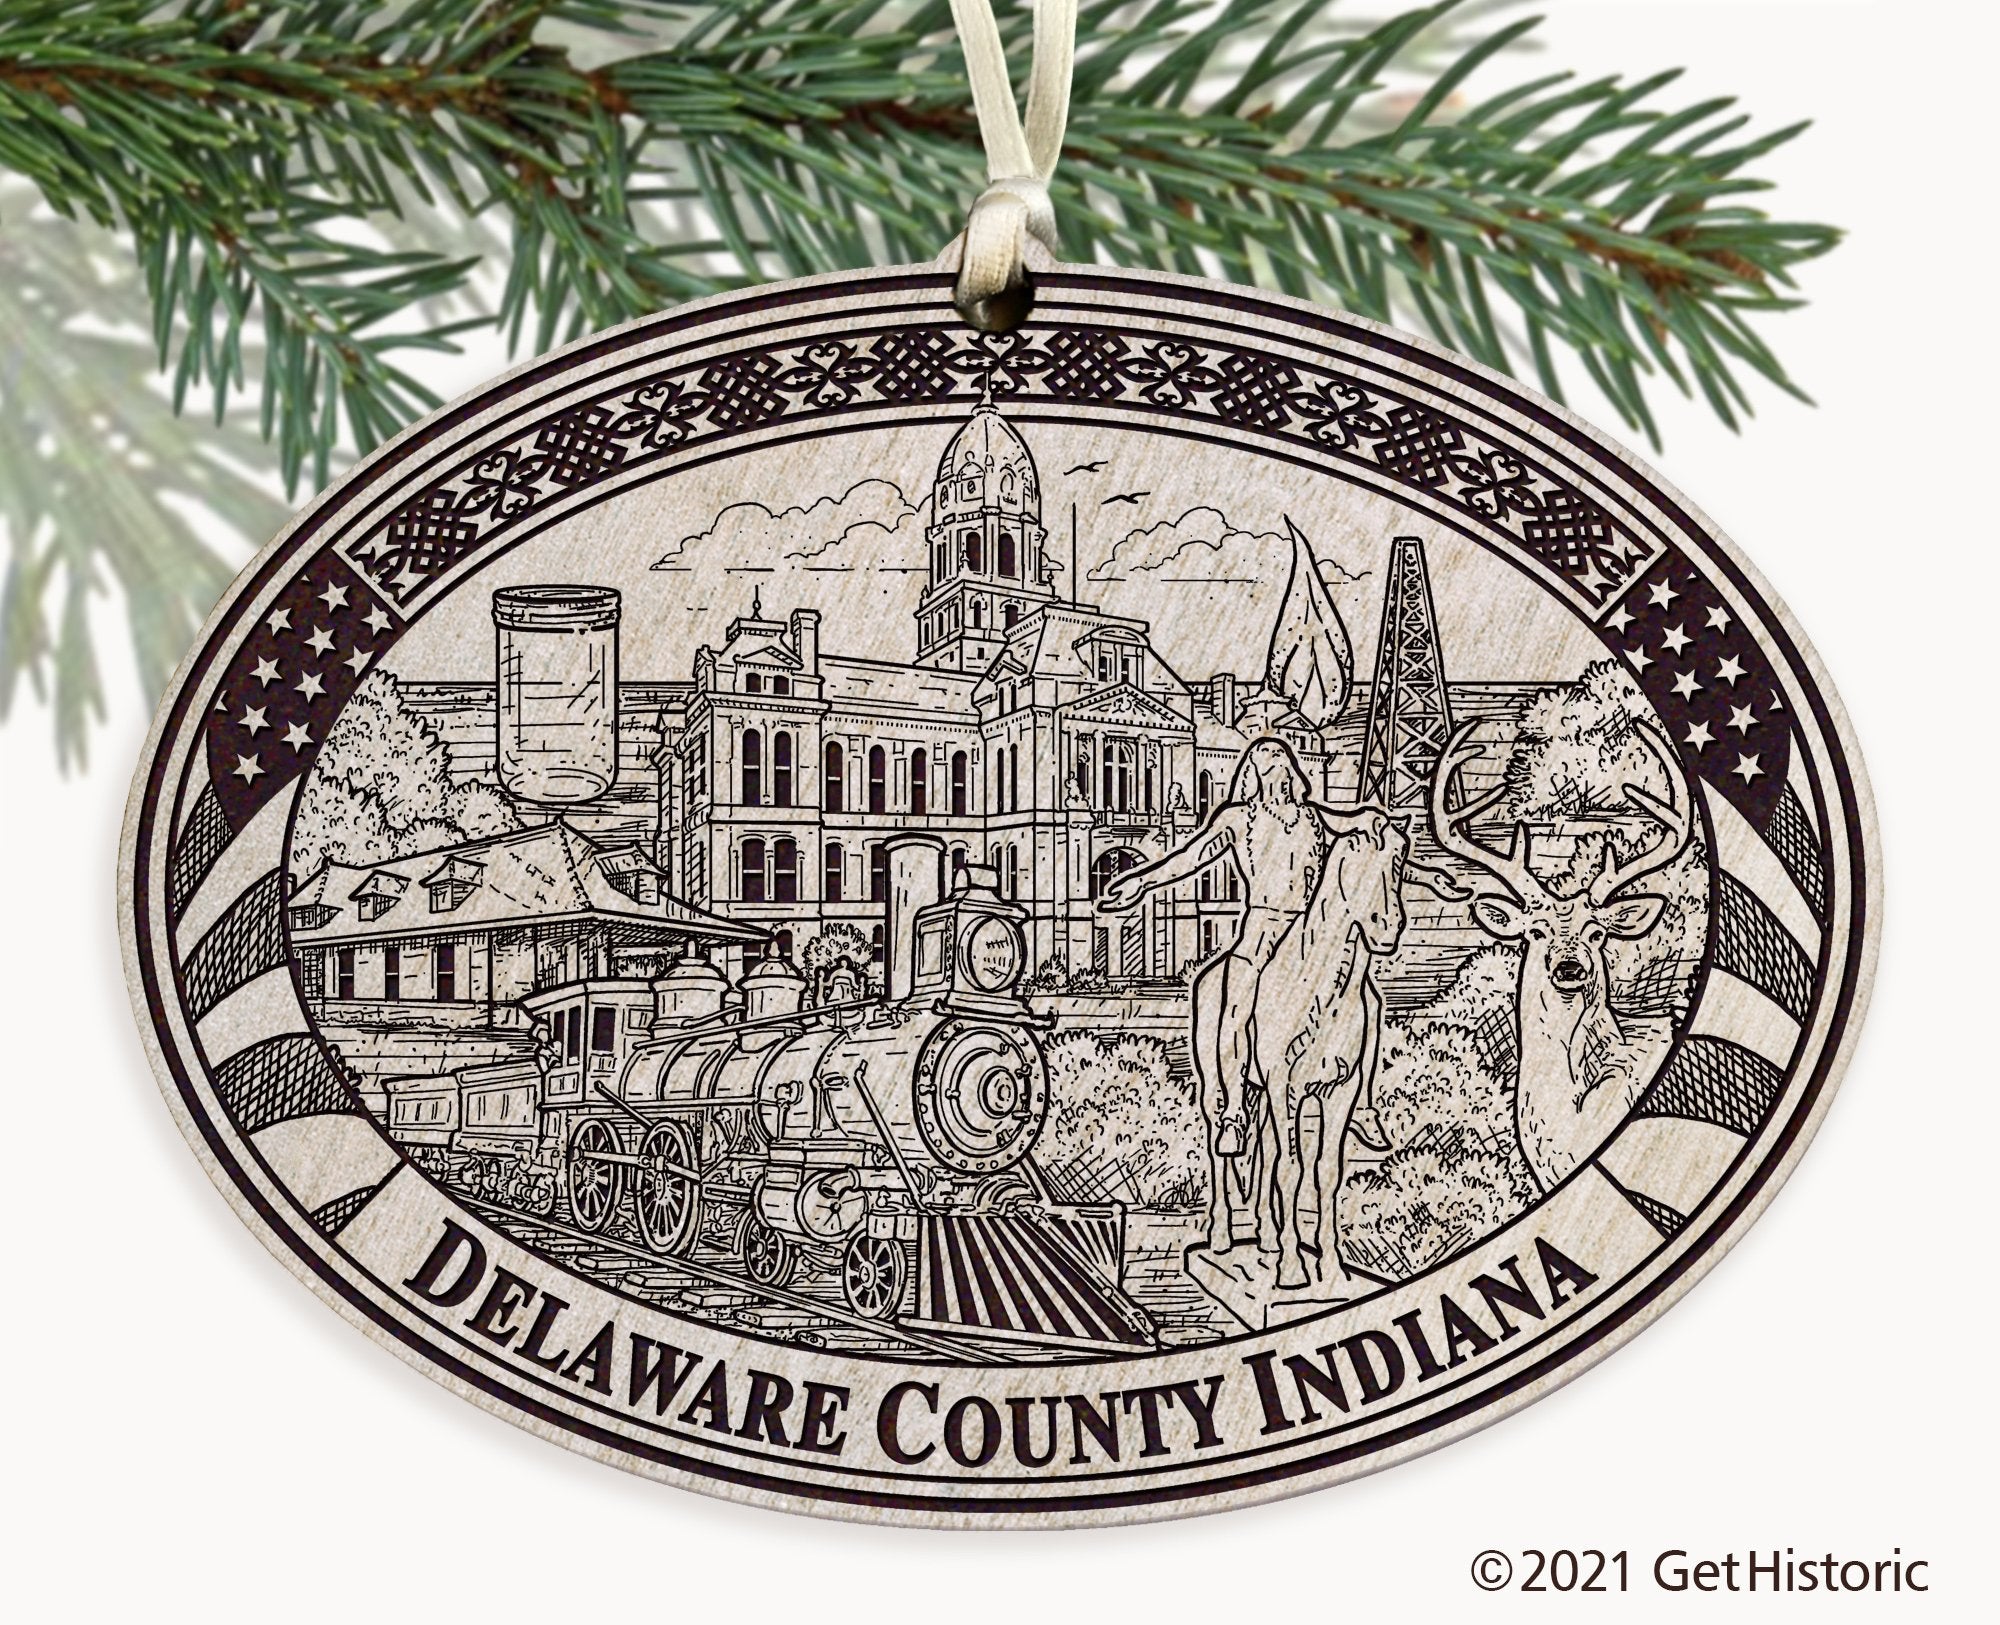 Delaware County Indiana Engraved Ornament